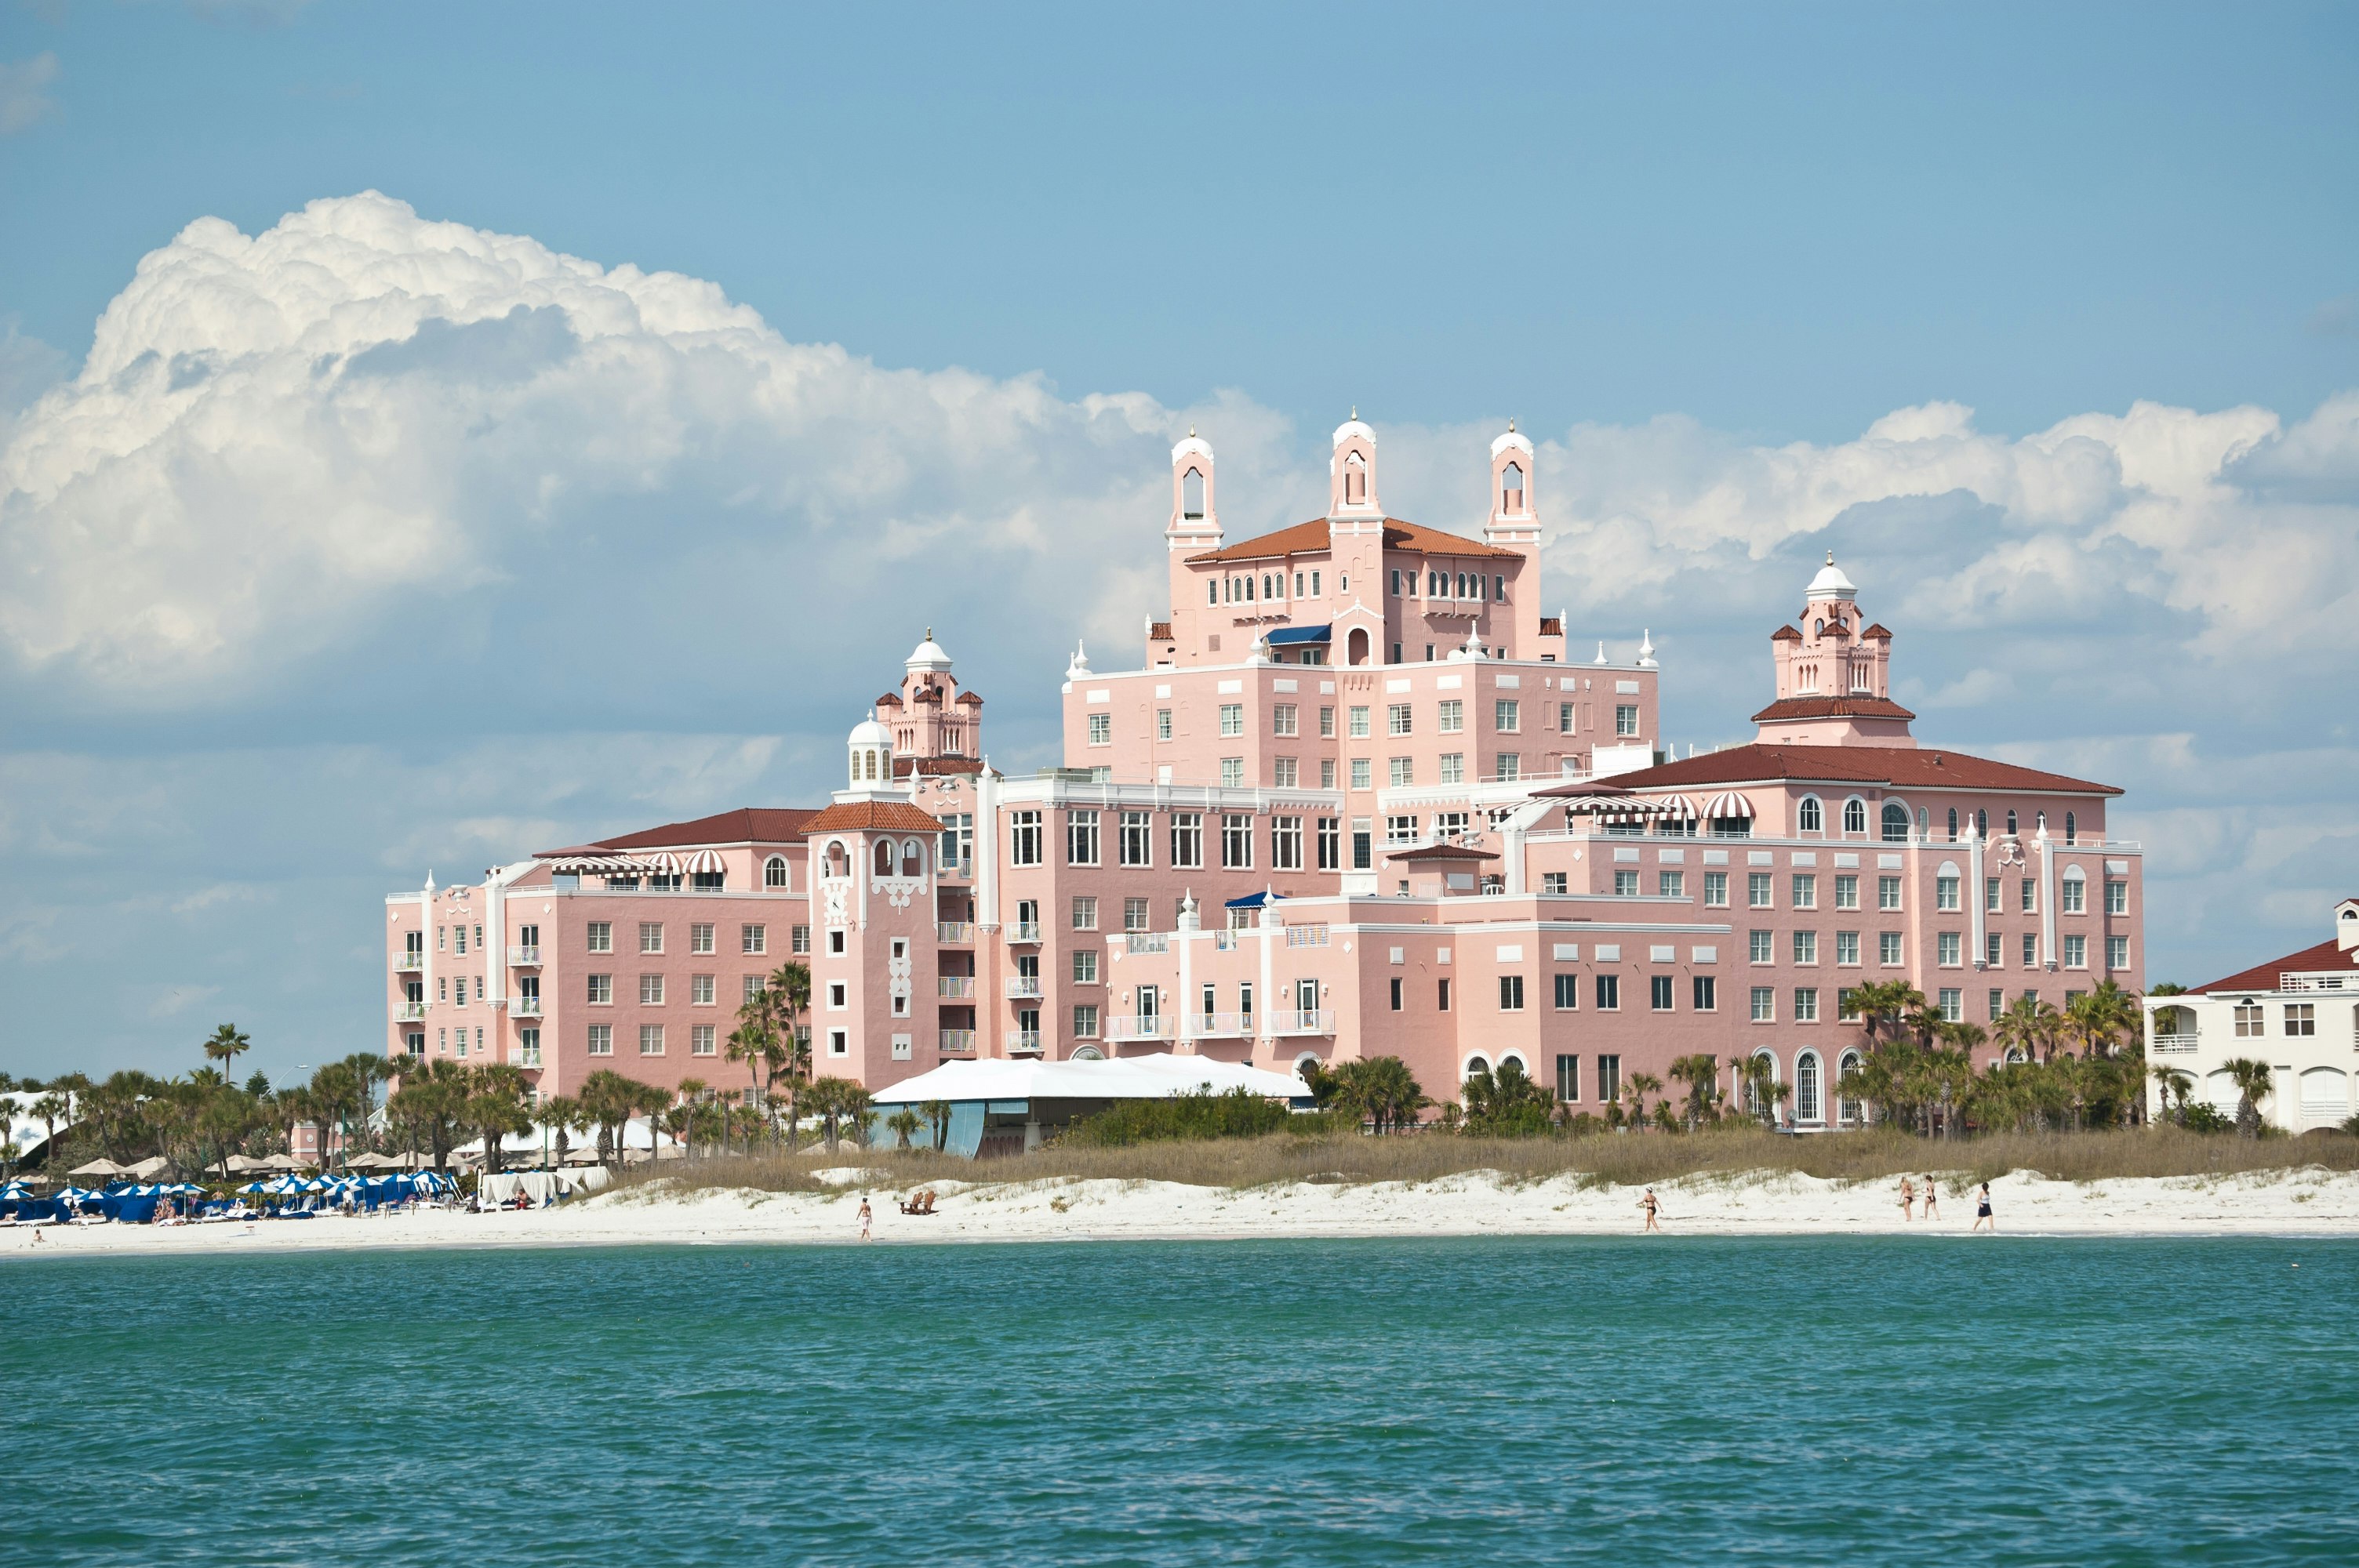 The pink art deco facade of the Don CeSar Resort rides over the white sands of St. Pete beach in Florida and the deep aquamarine waters of Tampa Bay, with big white cumulonimbus clouds against the stone-washed denim sky in the background.